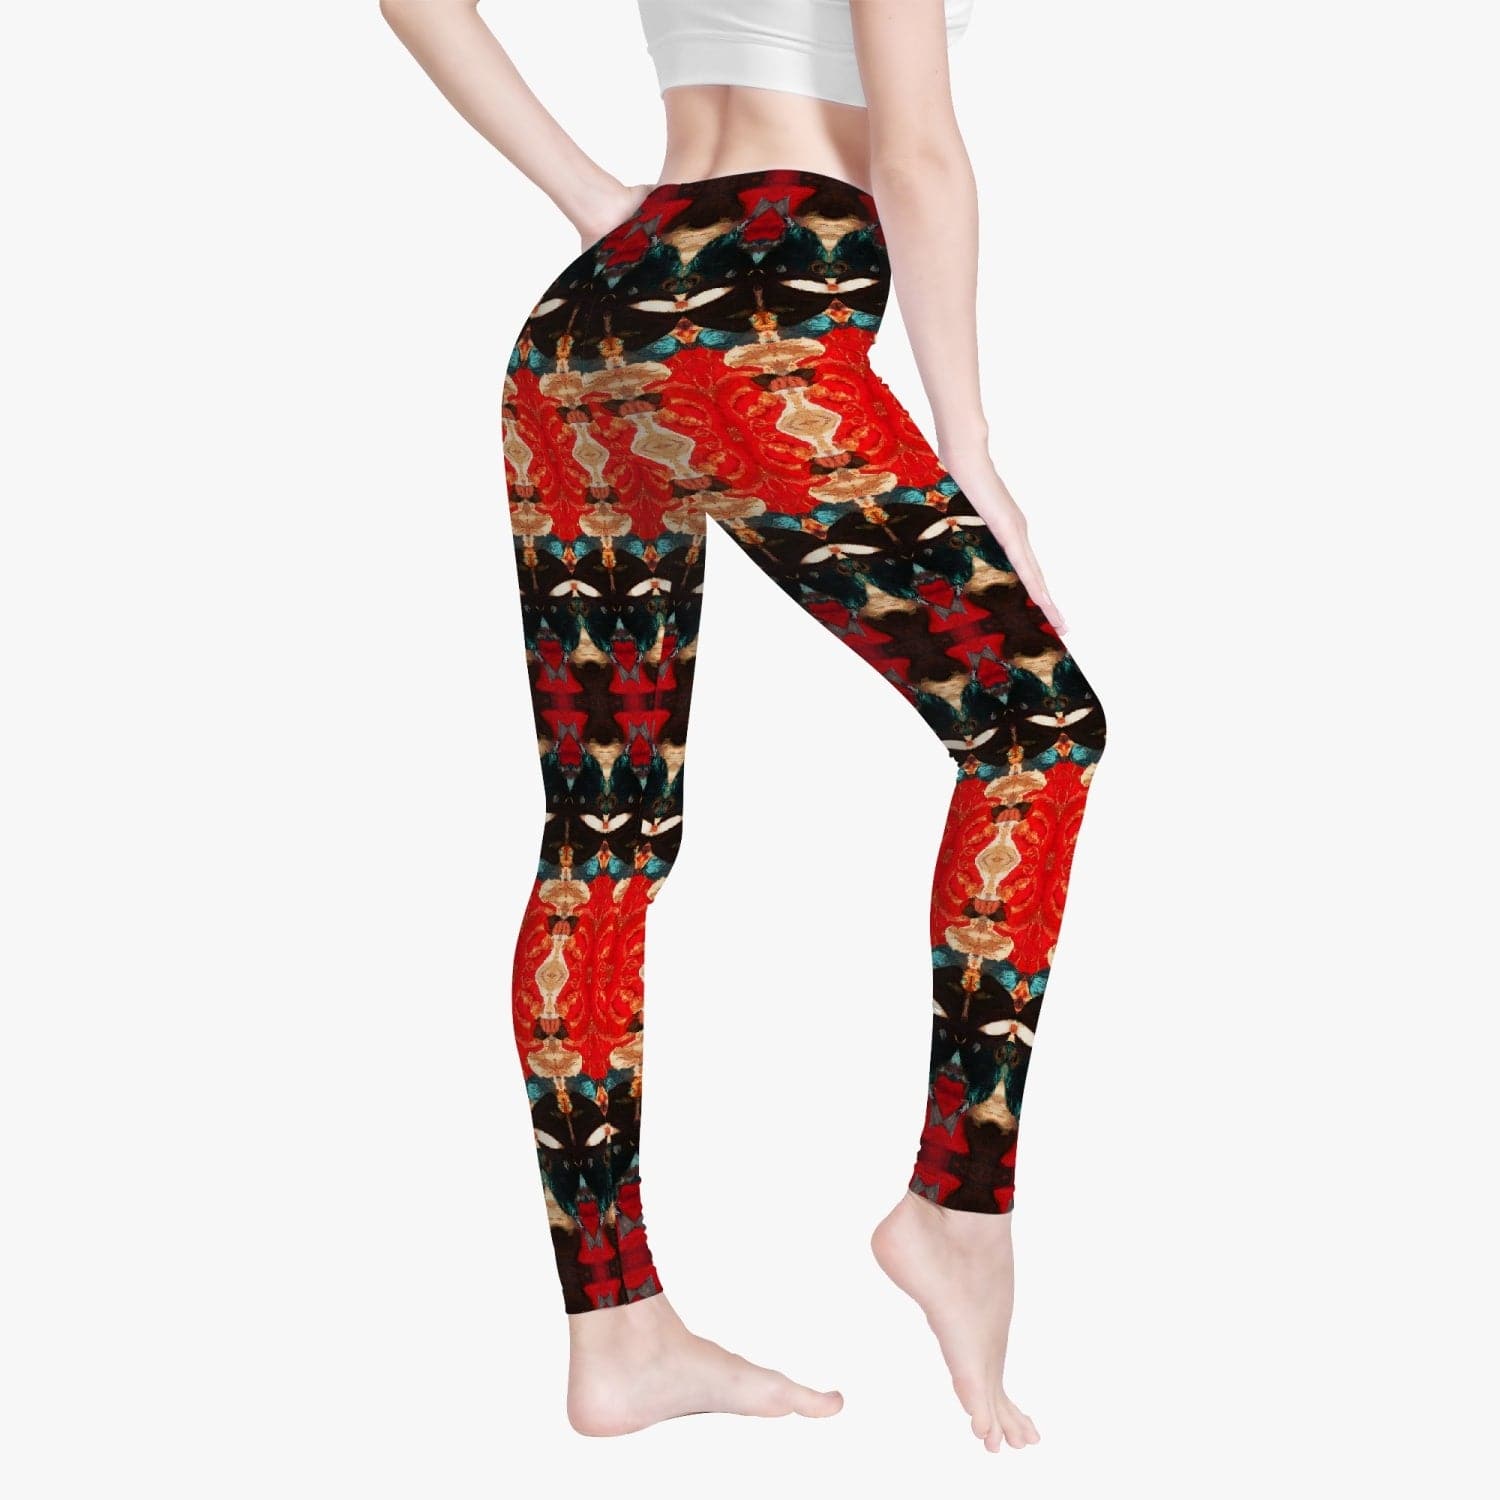 Red Orange and Black Hymalaian Patterned Yoga Pants for Women